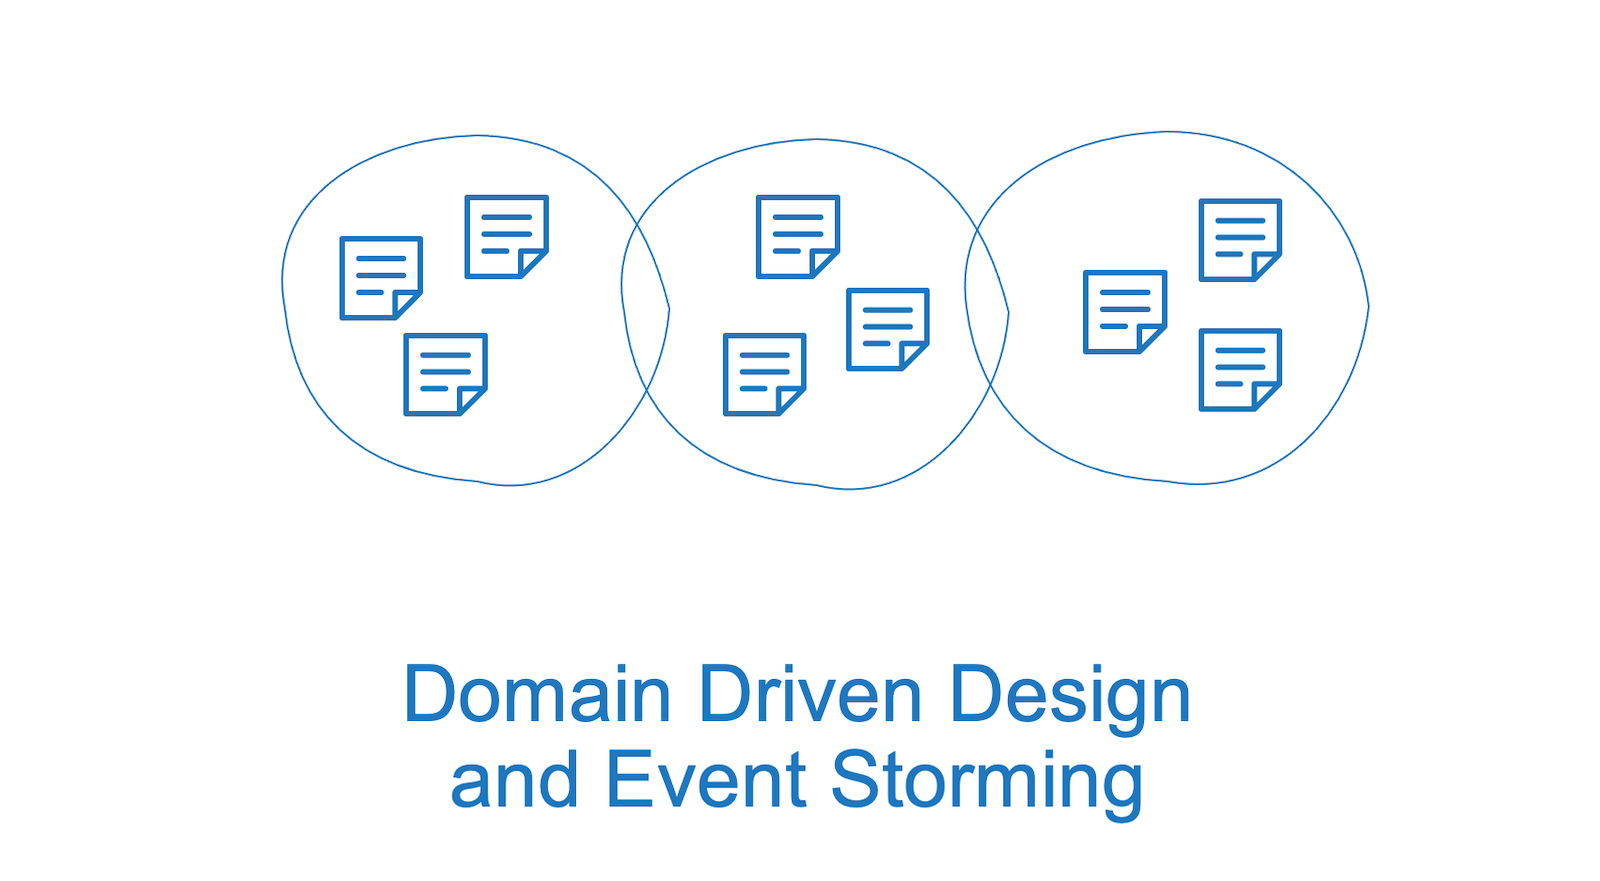 CEO Guide to Domain Driven Design - Leading a Digital